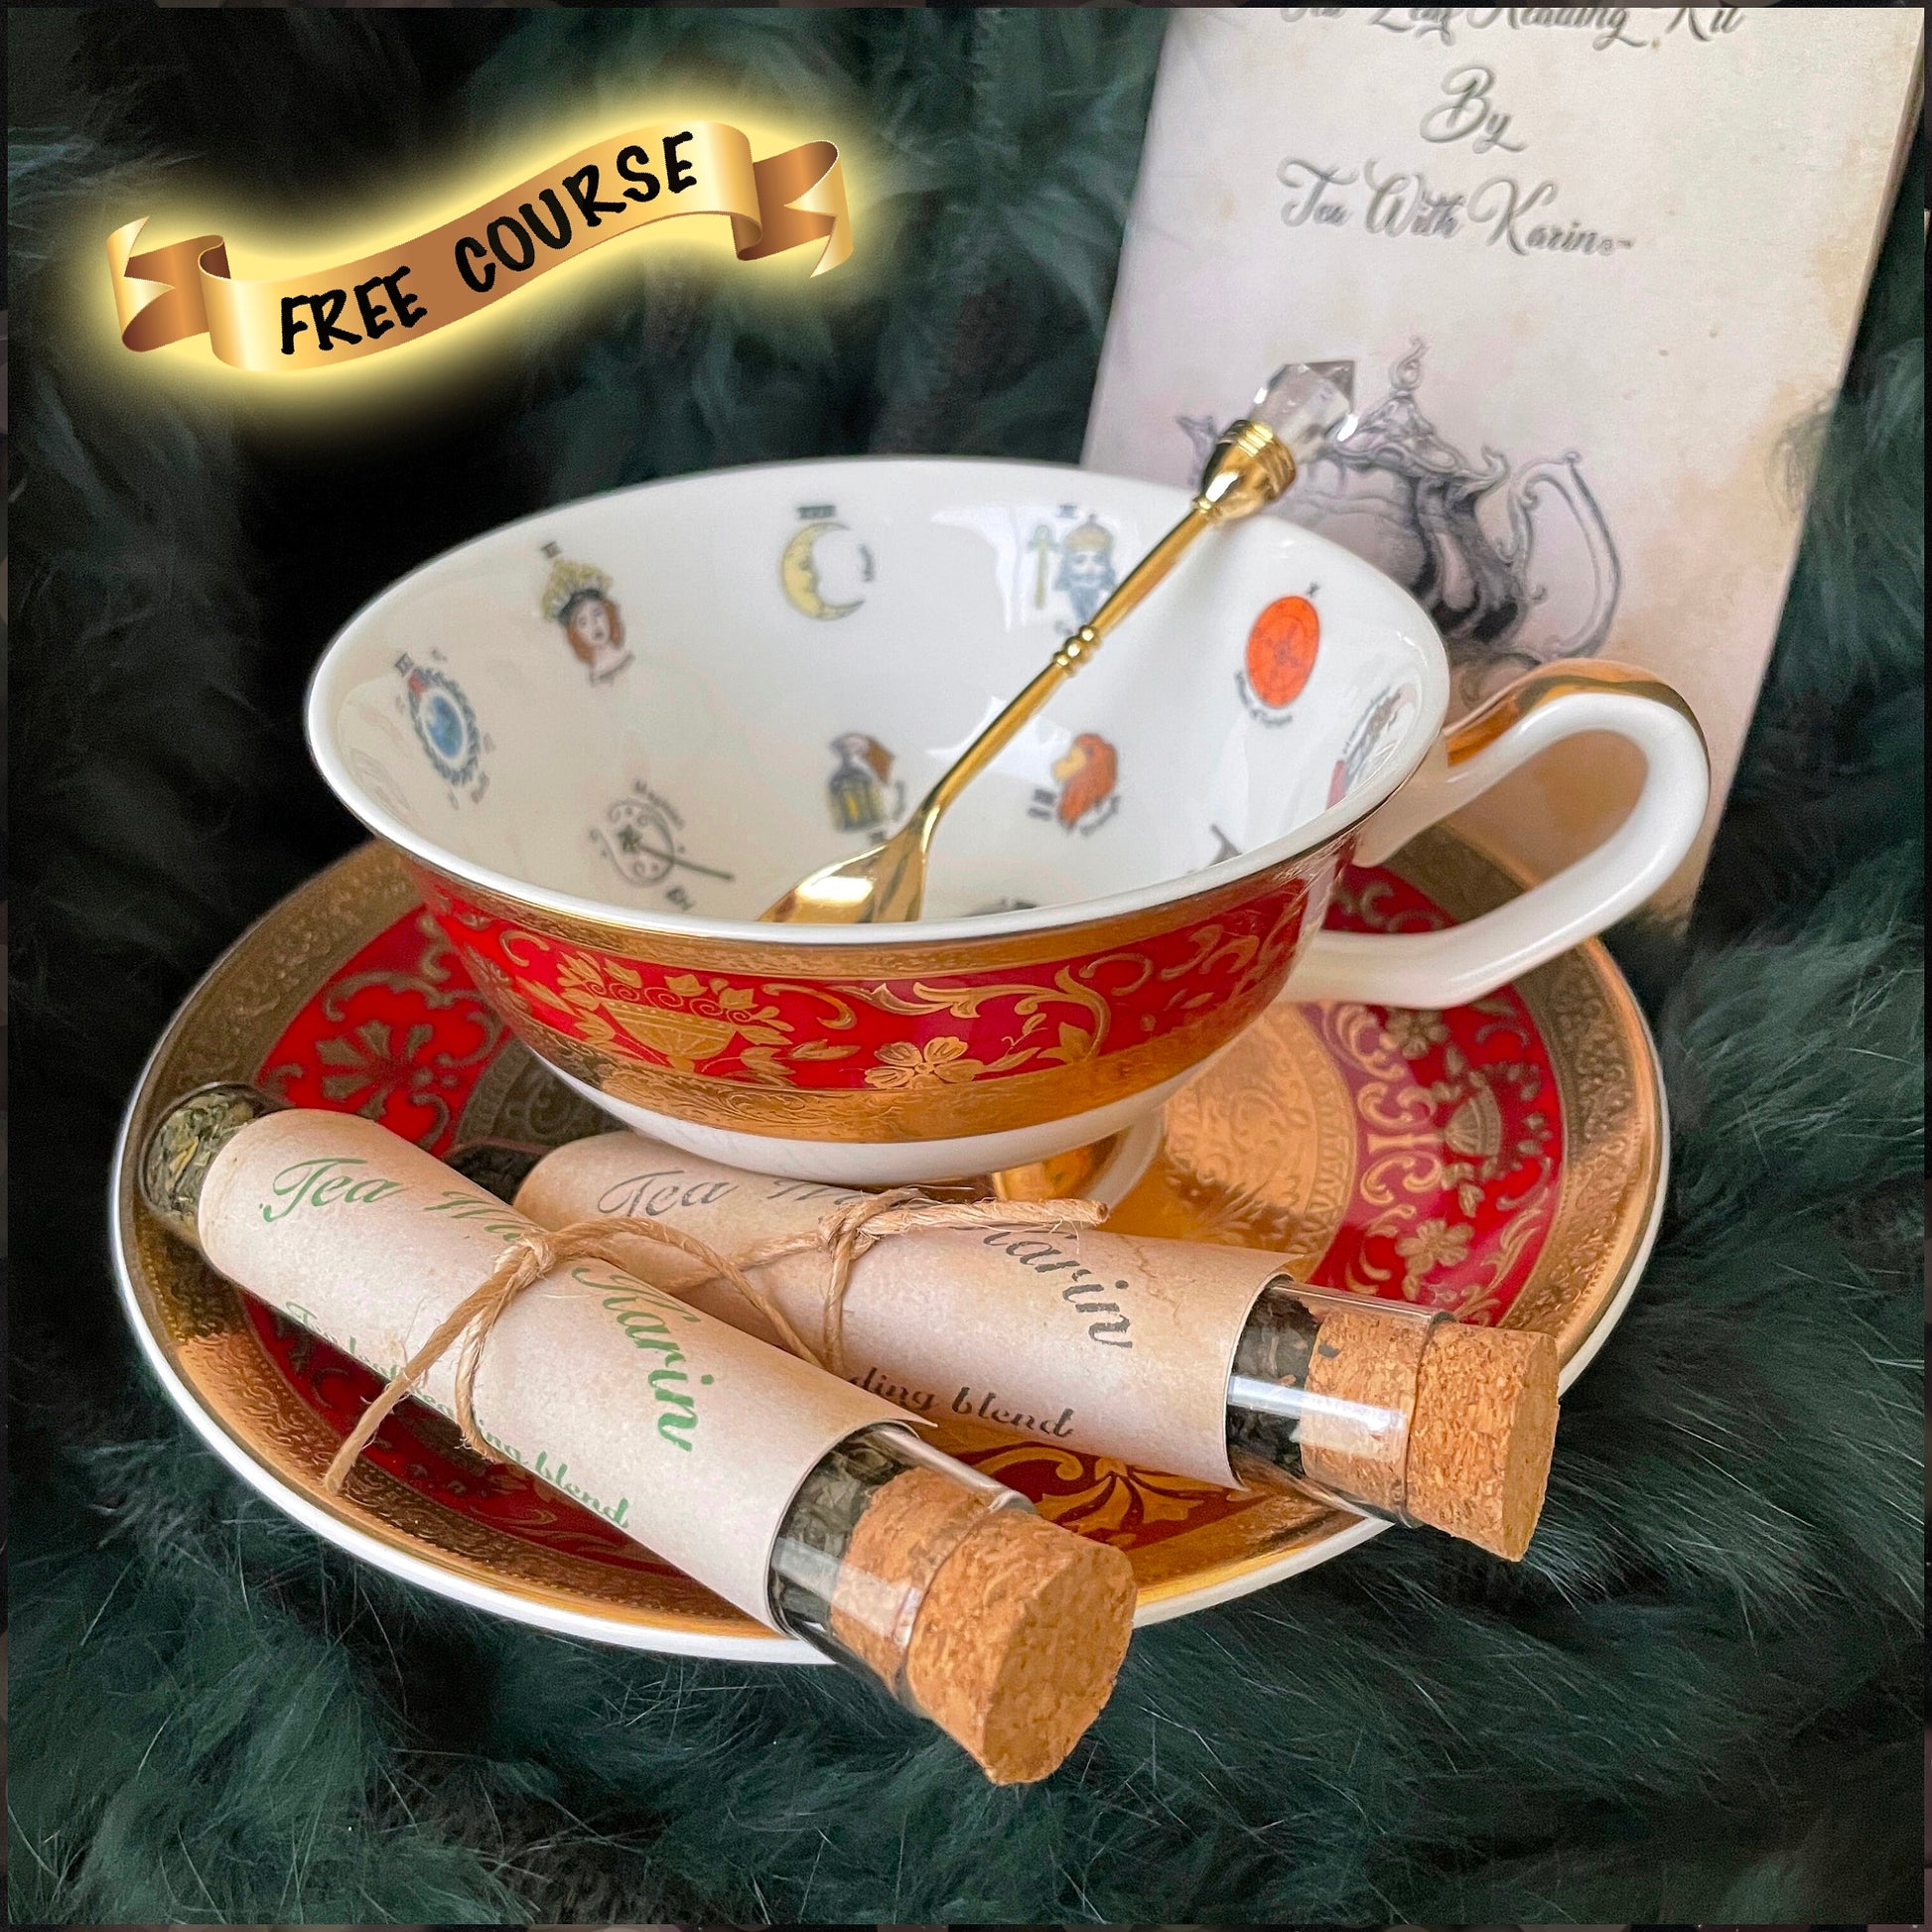 This is a fortune teller teacup that is used just like you would tarot cards to forecast your future. Learn tea leaf reading as you just use the booklet provided and read what image the tea lands on. Embossed 3D 24kt real gold